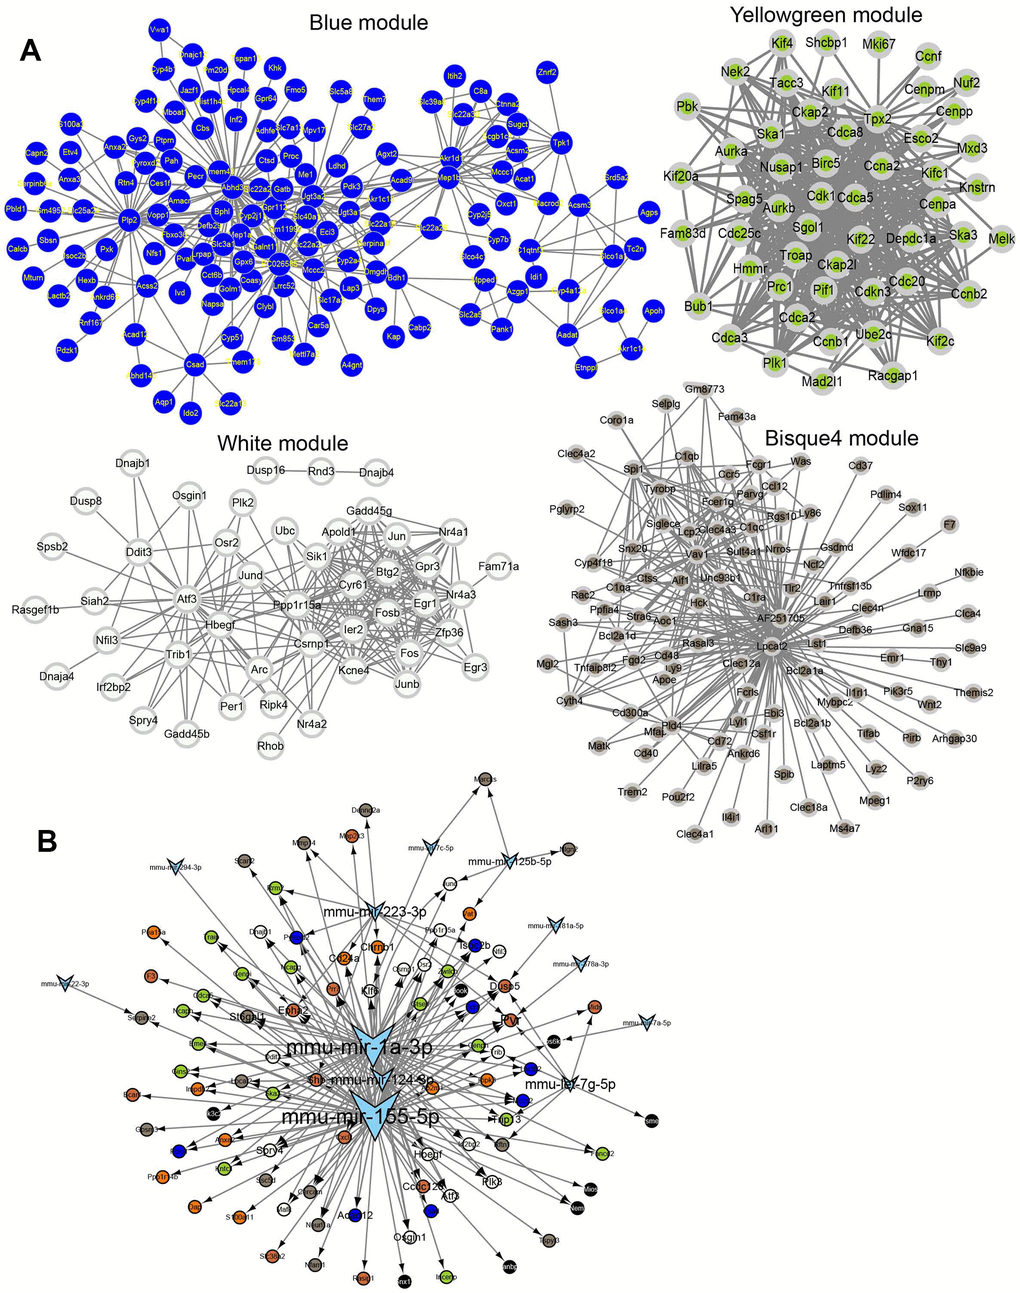 Network for each module. (A) Coexpression network for module blue, white, yellow, green and bisque4. (B) The regulatory network of IRI-related genes and miRNAs.